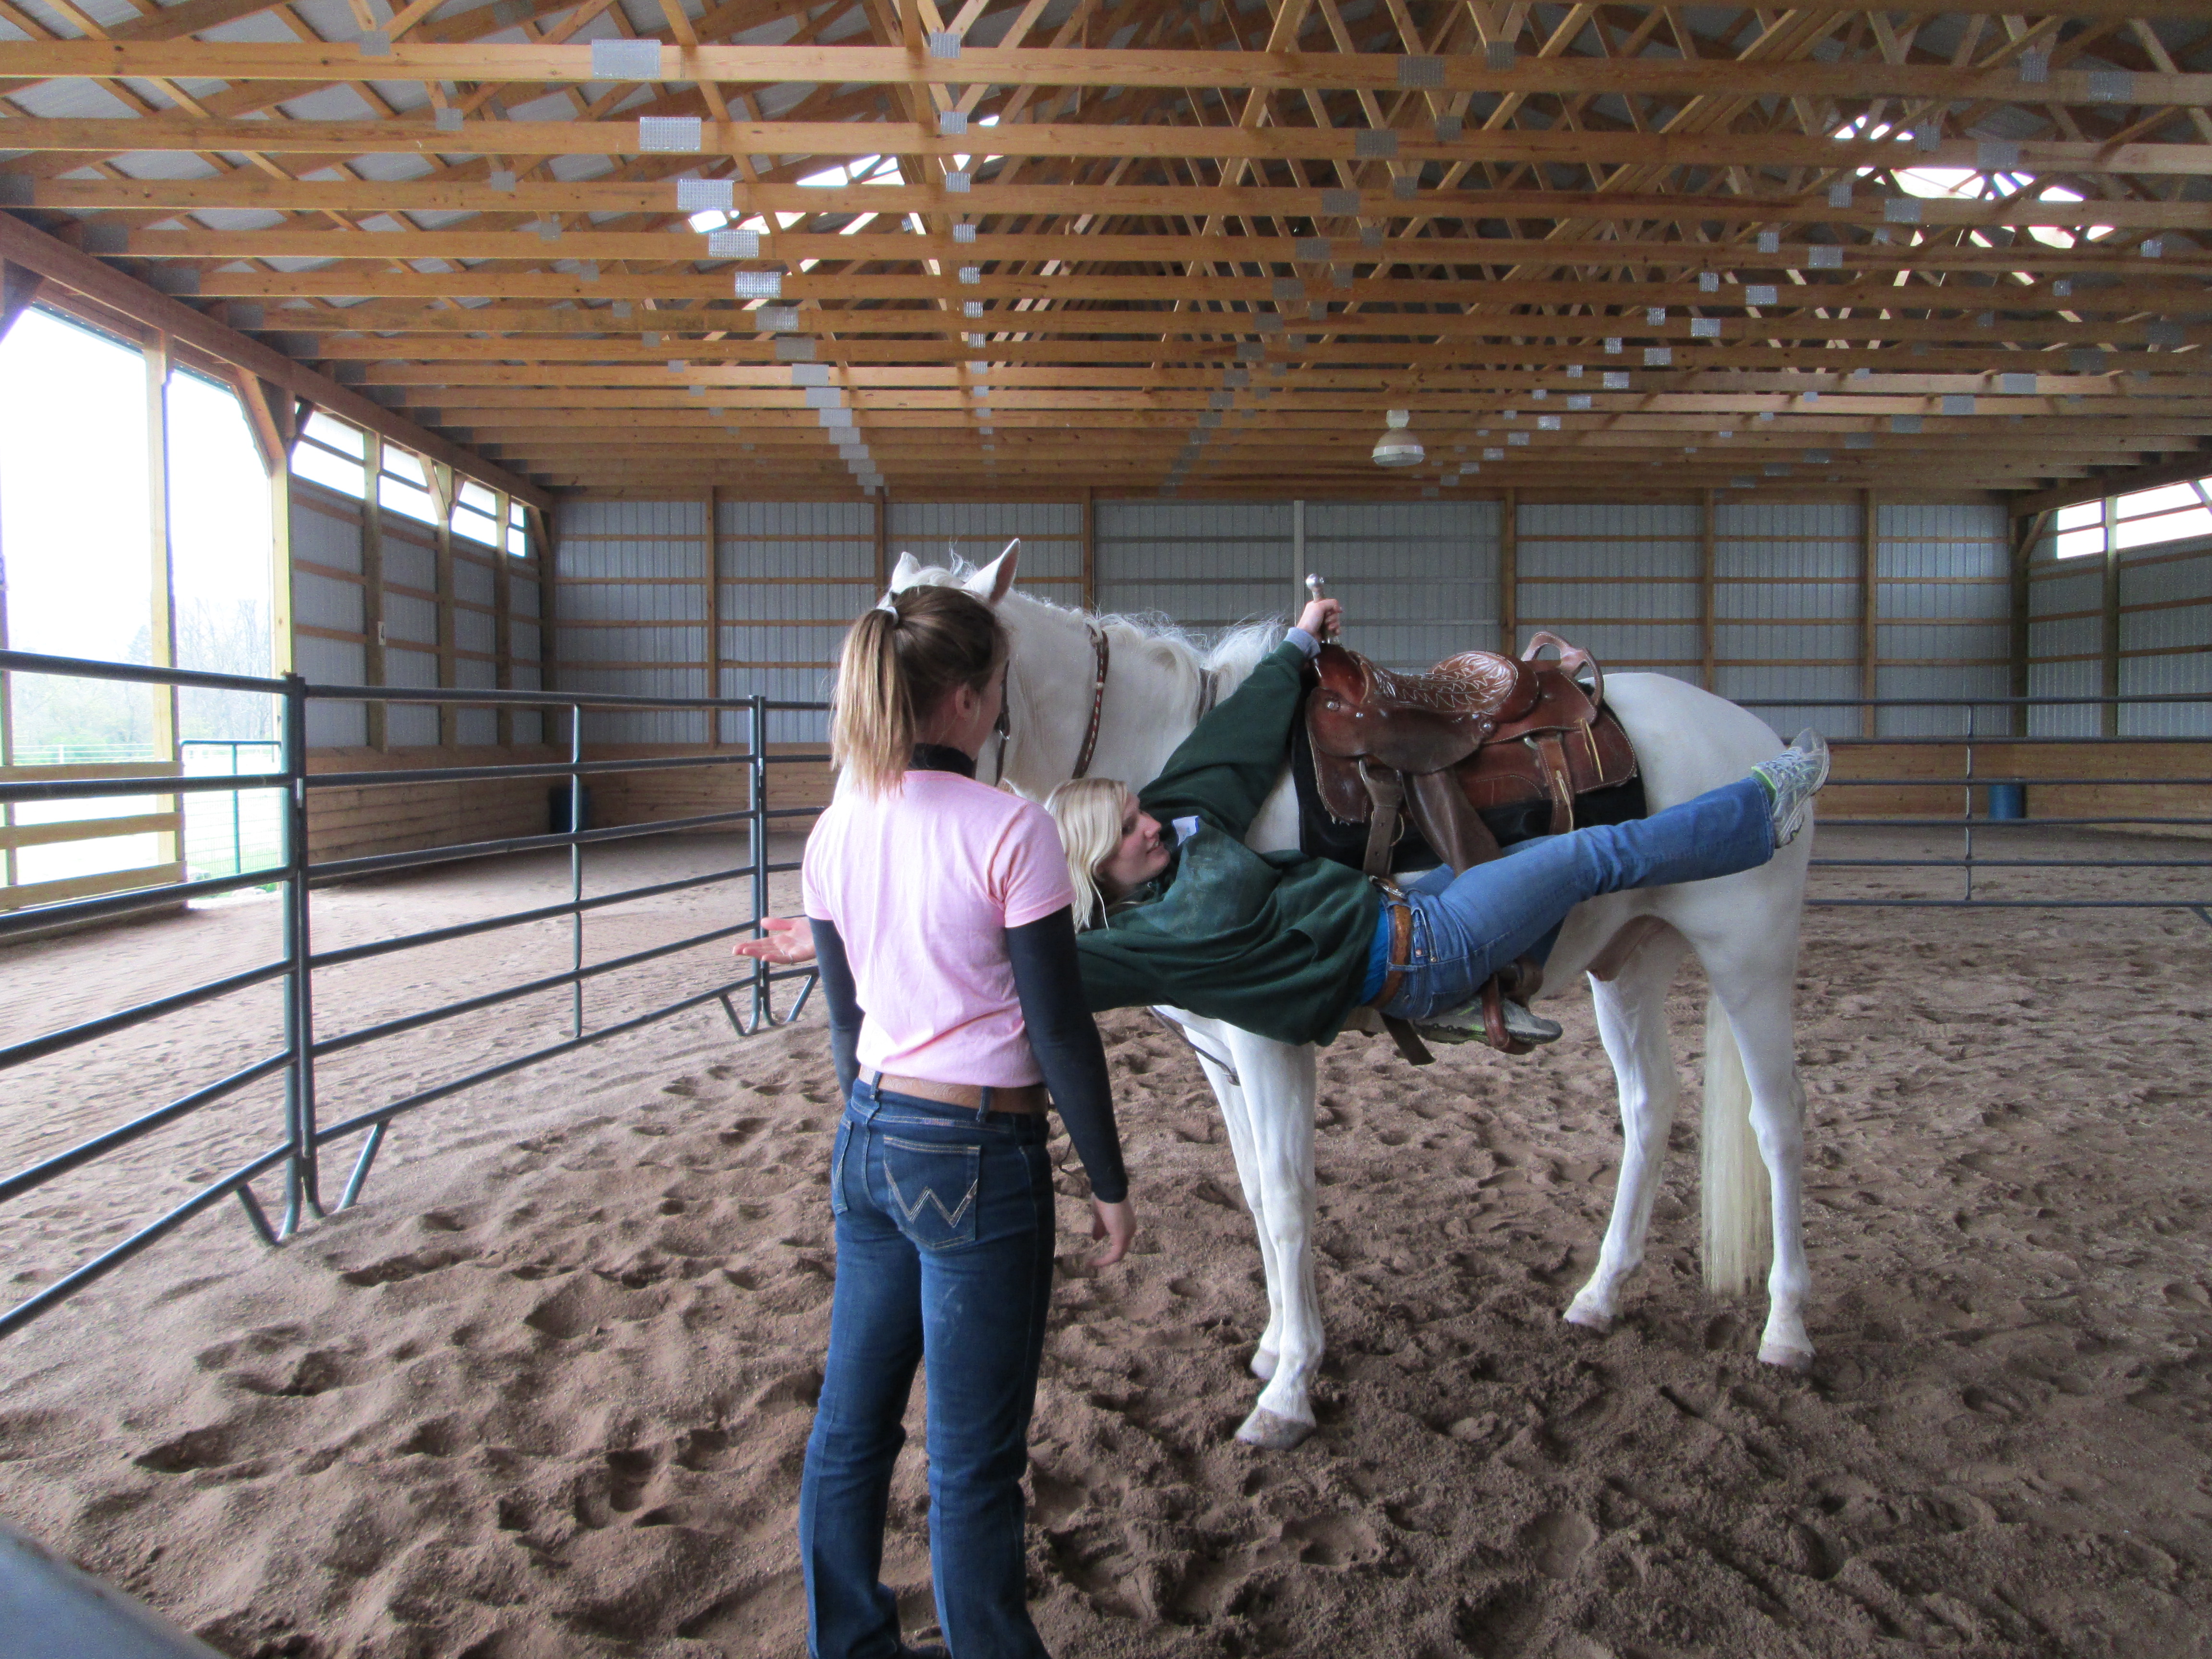 riding lessons and specialty training